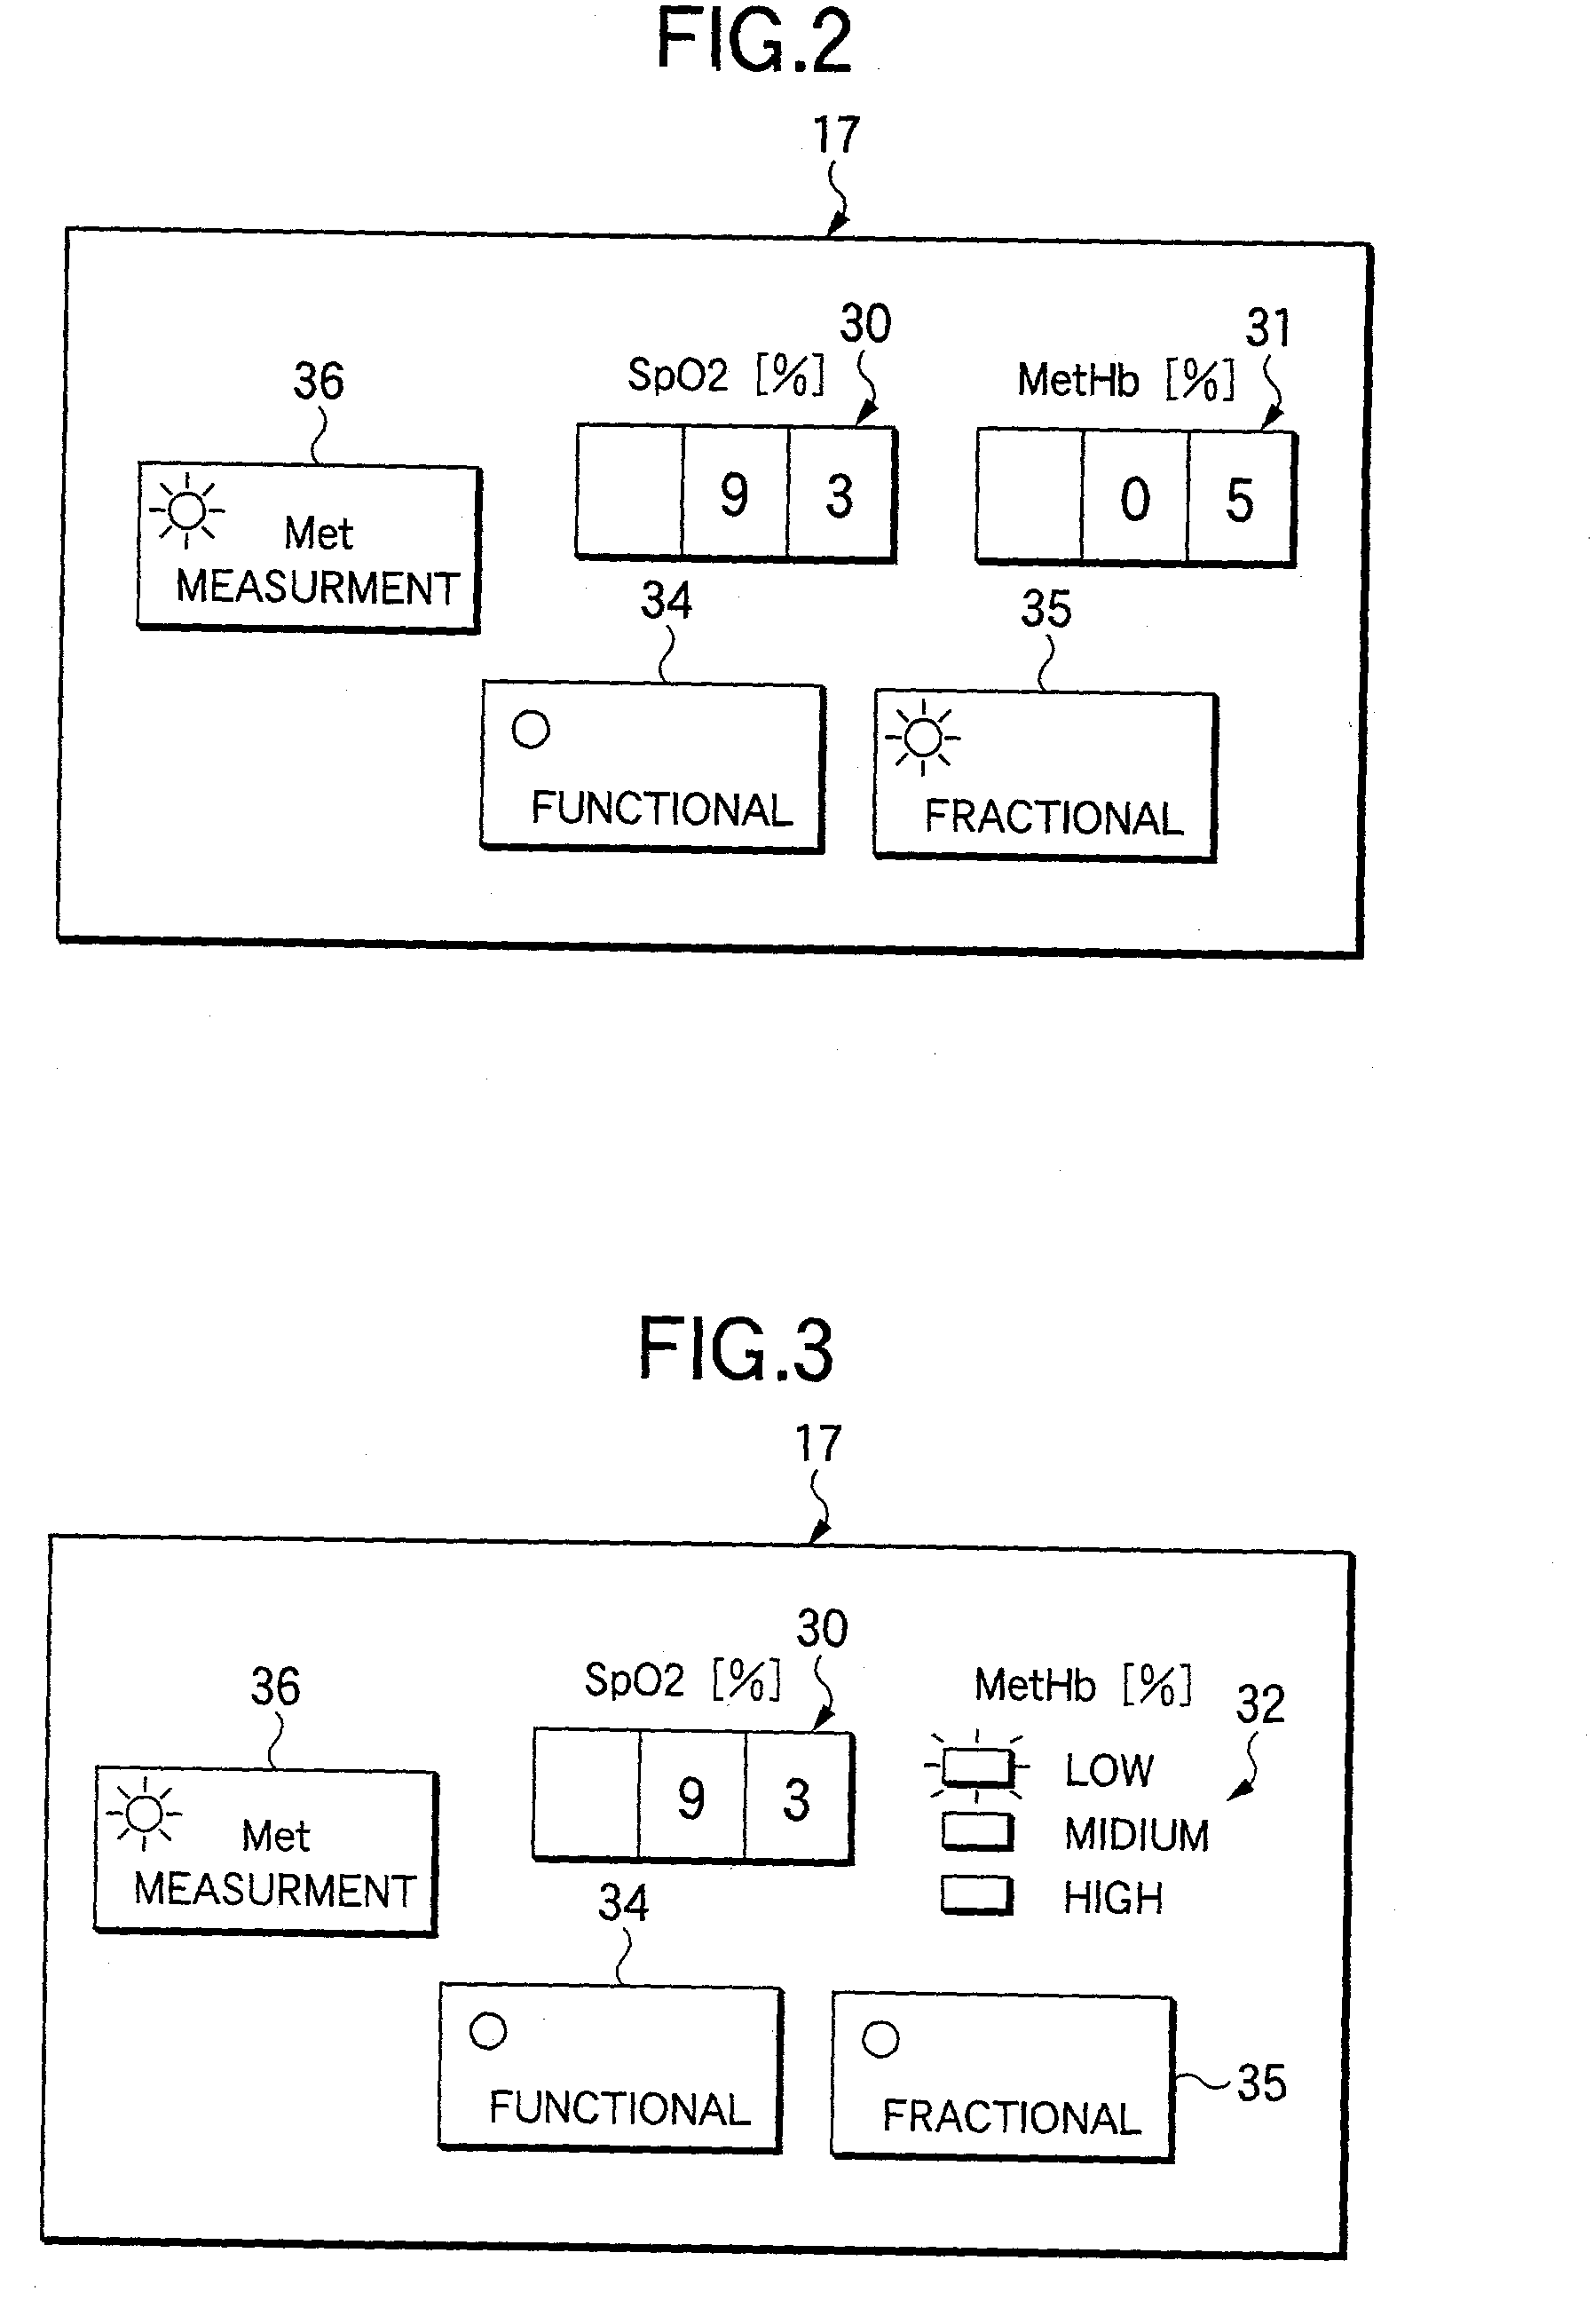 Apparatus for determining concentrations of hemoglobins